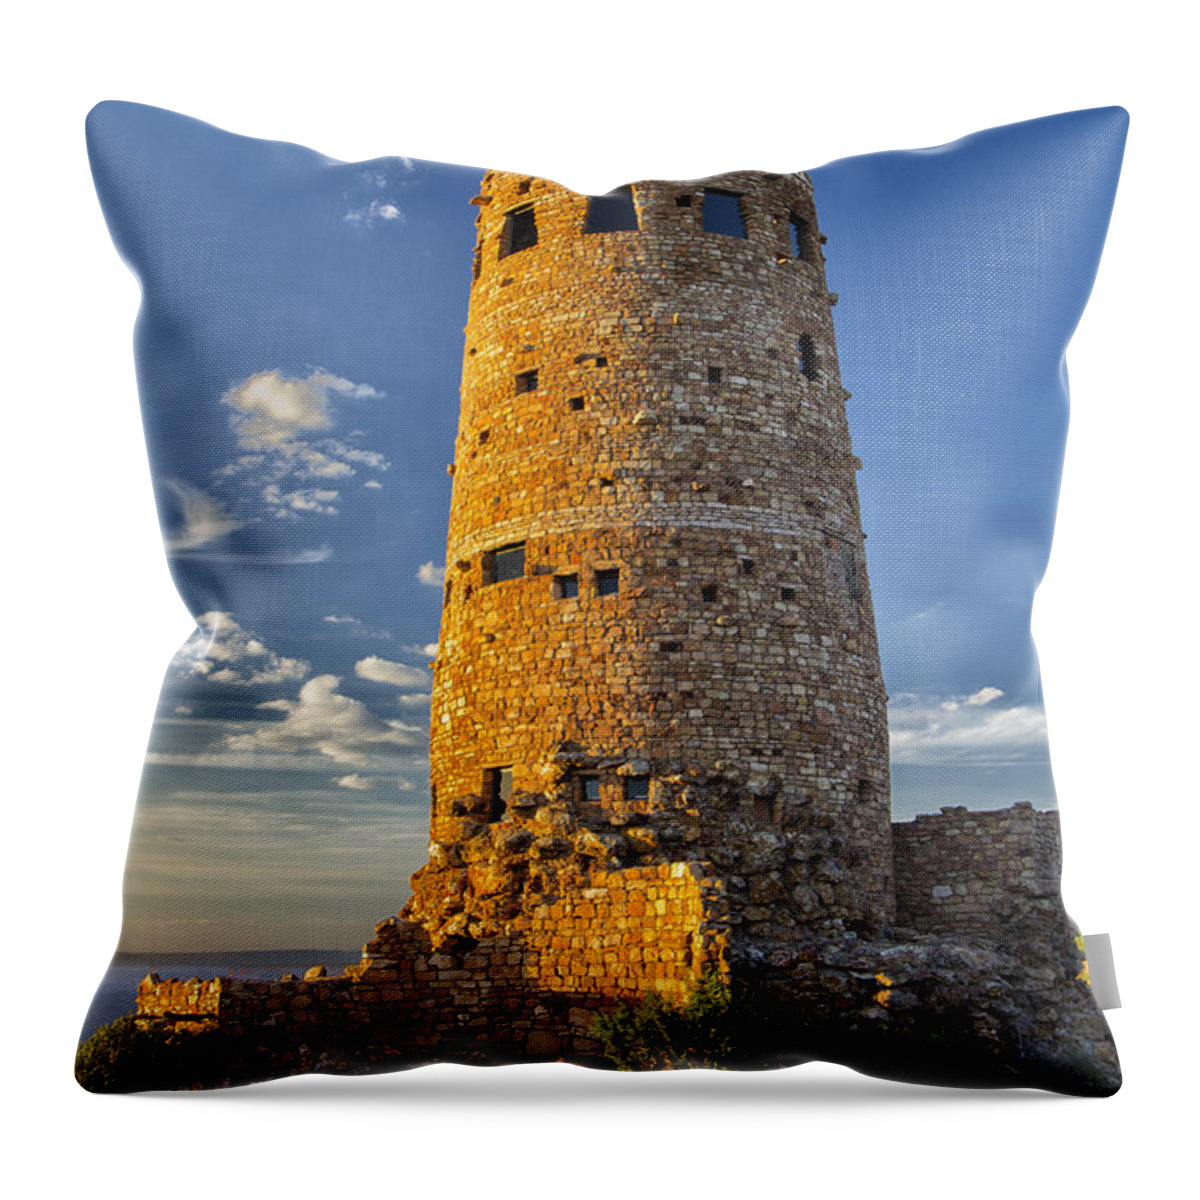 Desert View Throw Pillow featuring the photograph Desert View by Tom Kelly